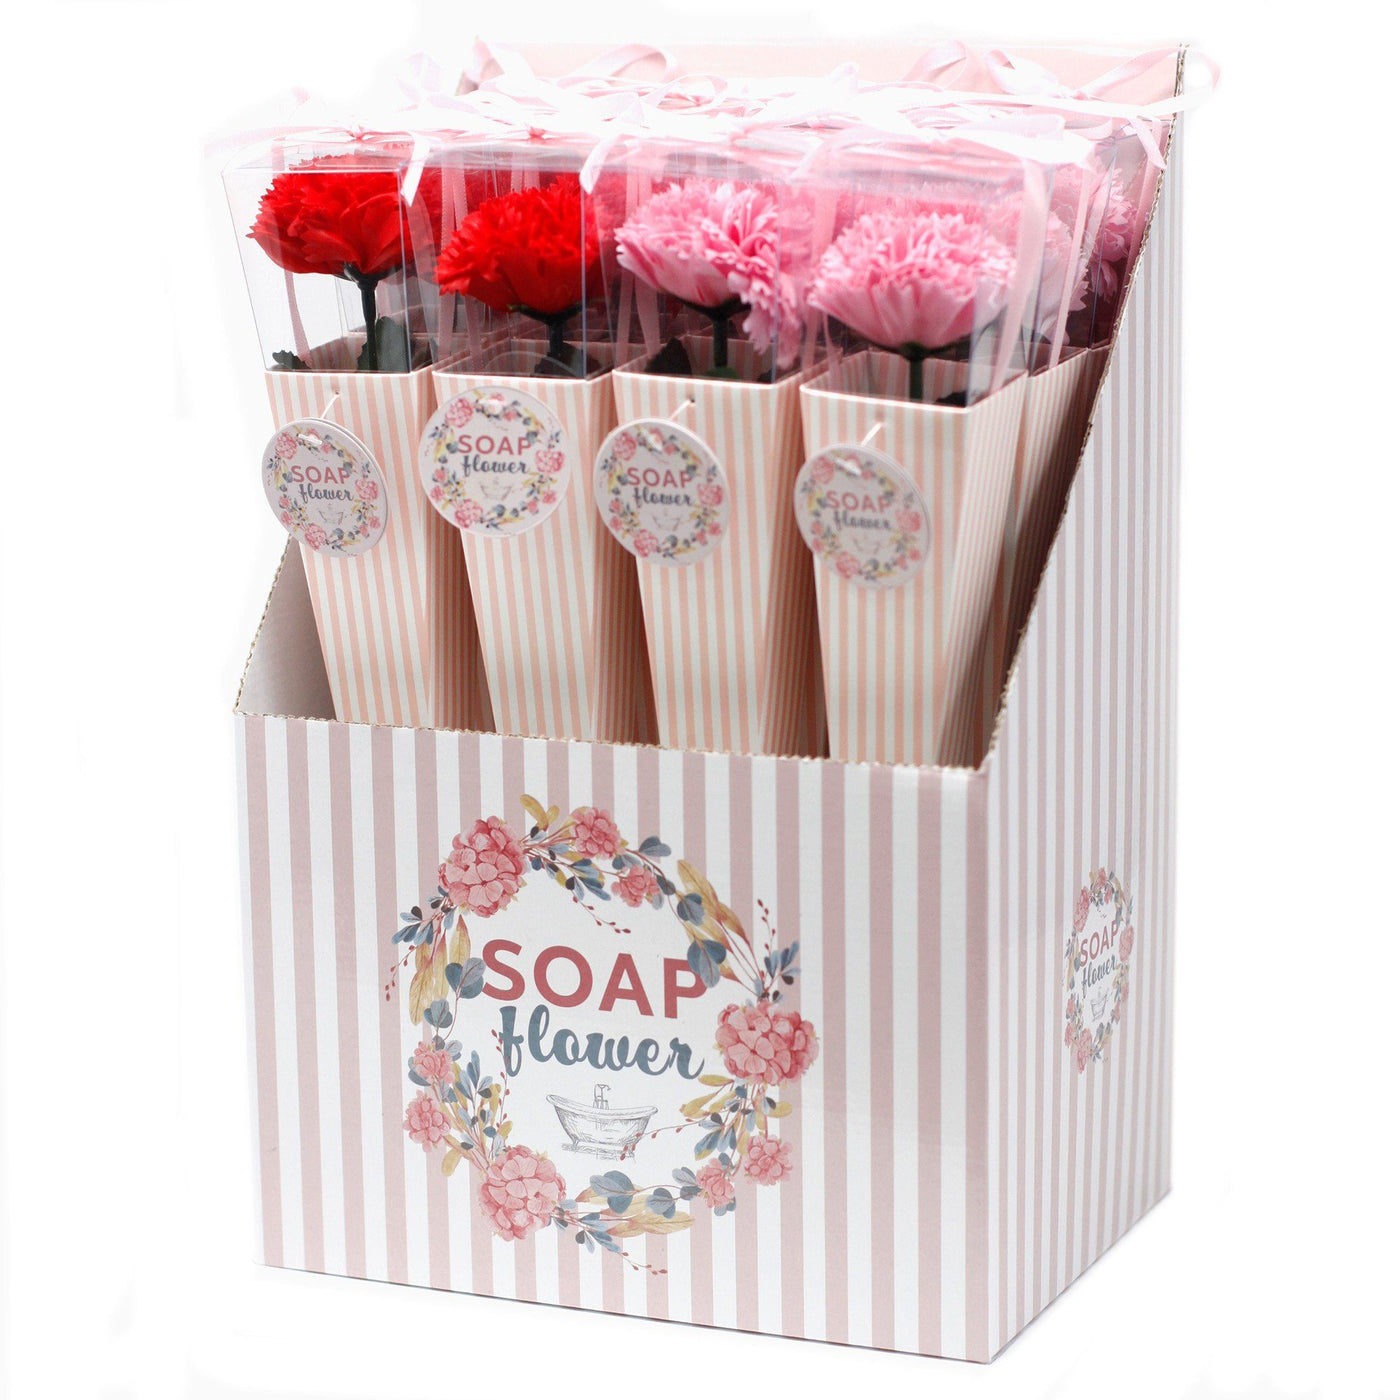 Luxury Soap Flower Medium Carnation Gift.  This stunning range of the newly designed Soap Flowers will make a perfect display in your home. They are a perfect addition for a relaxing and romantic bath, or you can even use individual petals as guest soaps. Soap Flowers are a perfect gift, Valentine's, wedding favours, Mother's Day, or just a little treat for yourself.